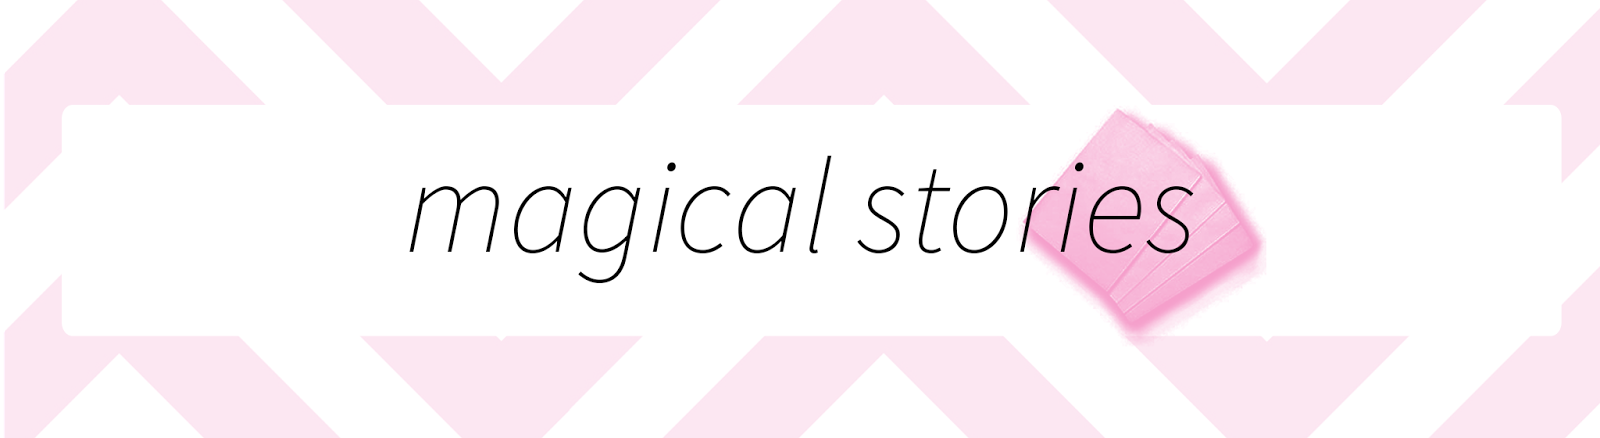 magical stories